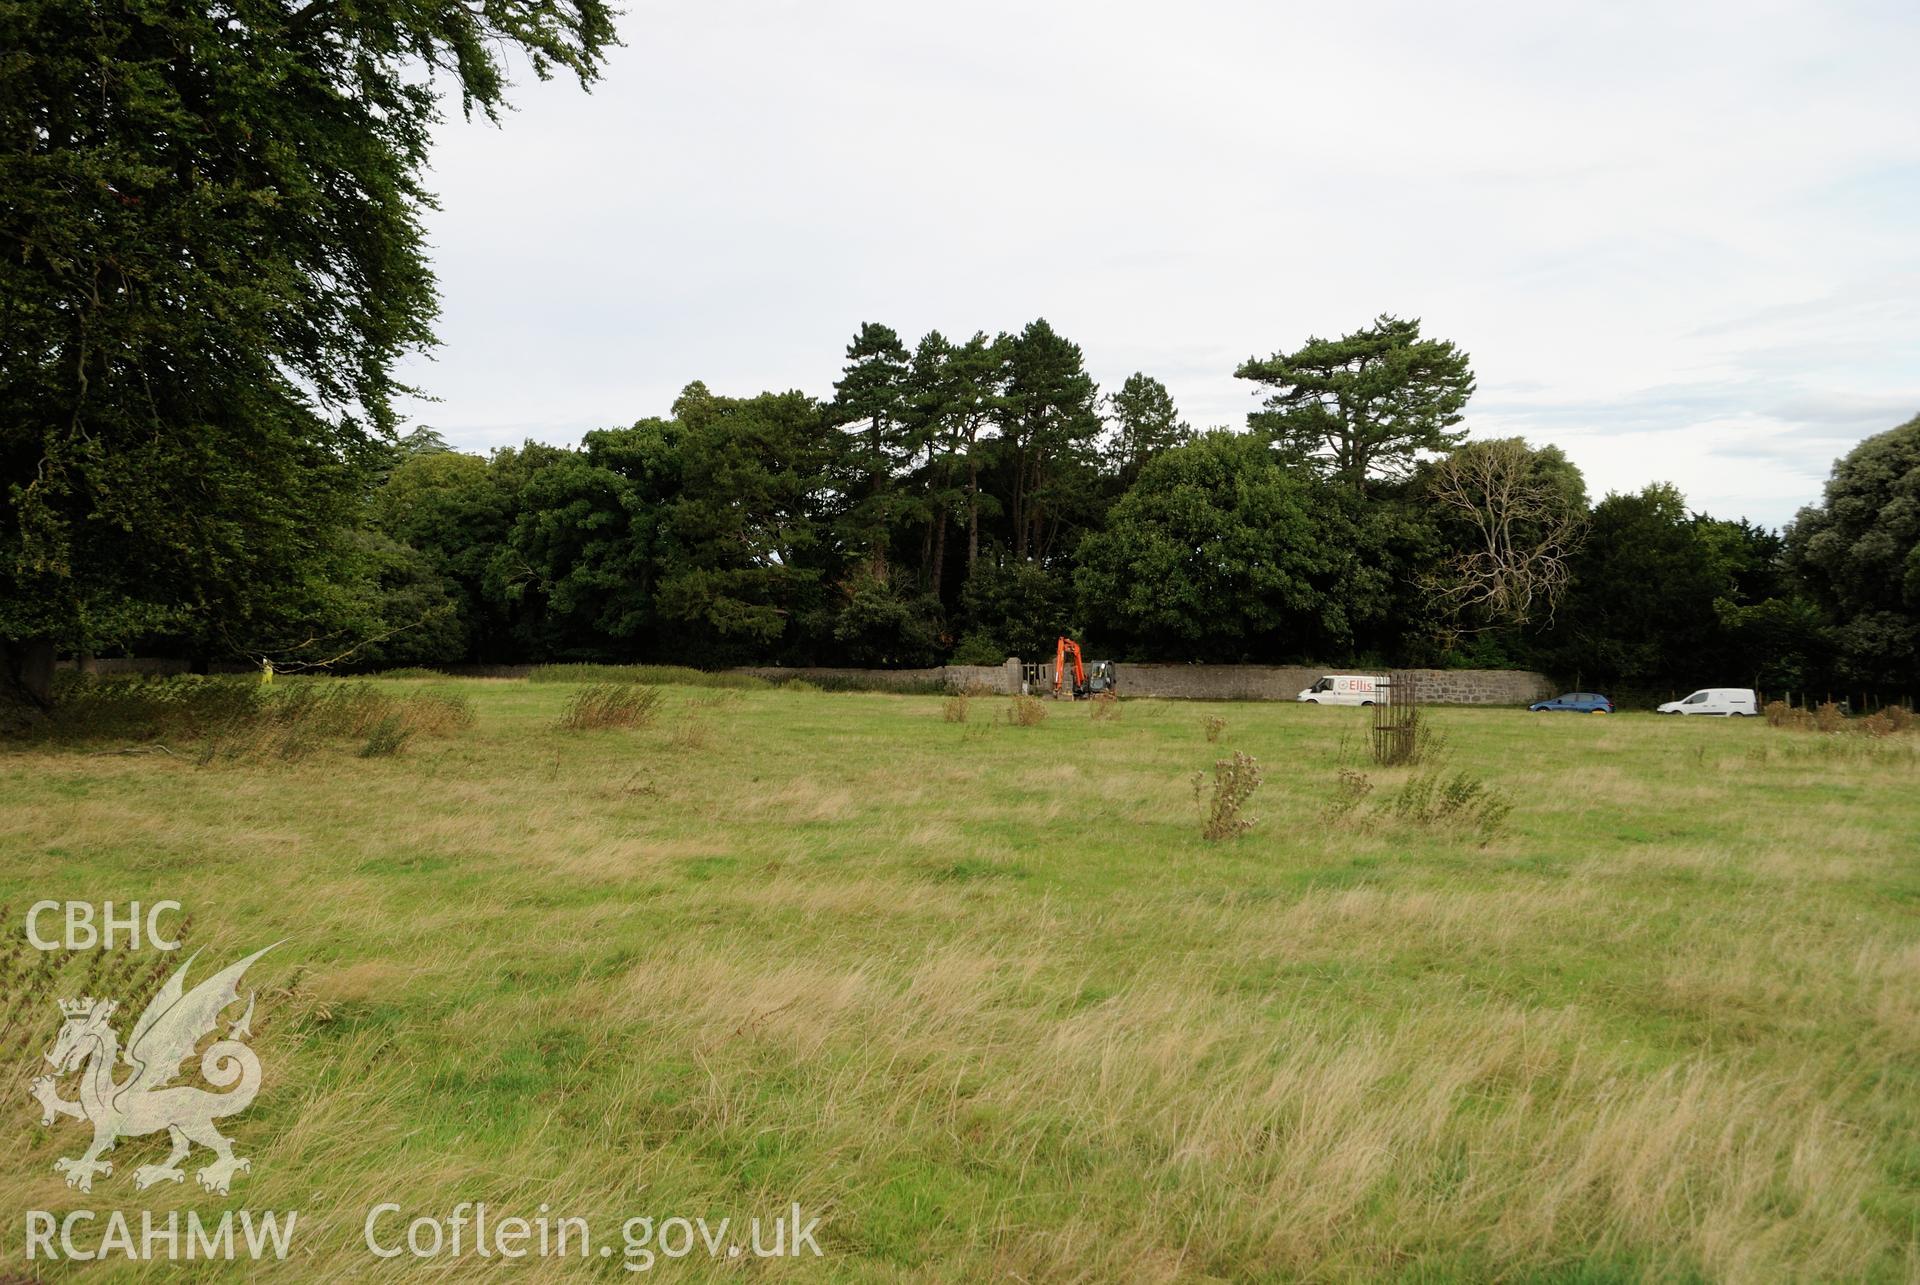 'General view from distance encompassing full 50m length of evaluation area, view from the south.' Photographed during archaeological evaluation of Kinmel Park, Abergele, conducted by Gwynedd Archaeological Trust on 22nd August 2018. Project no. 2571.